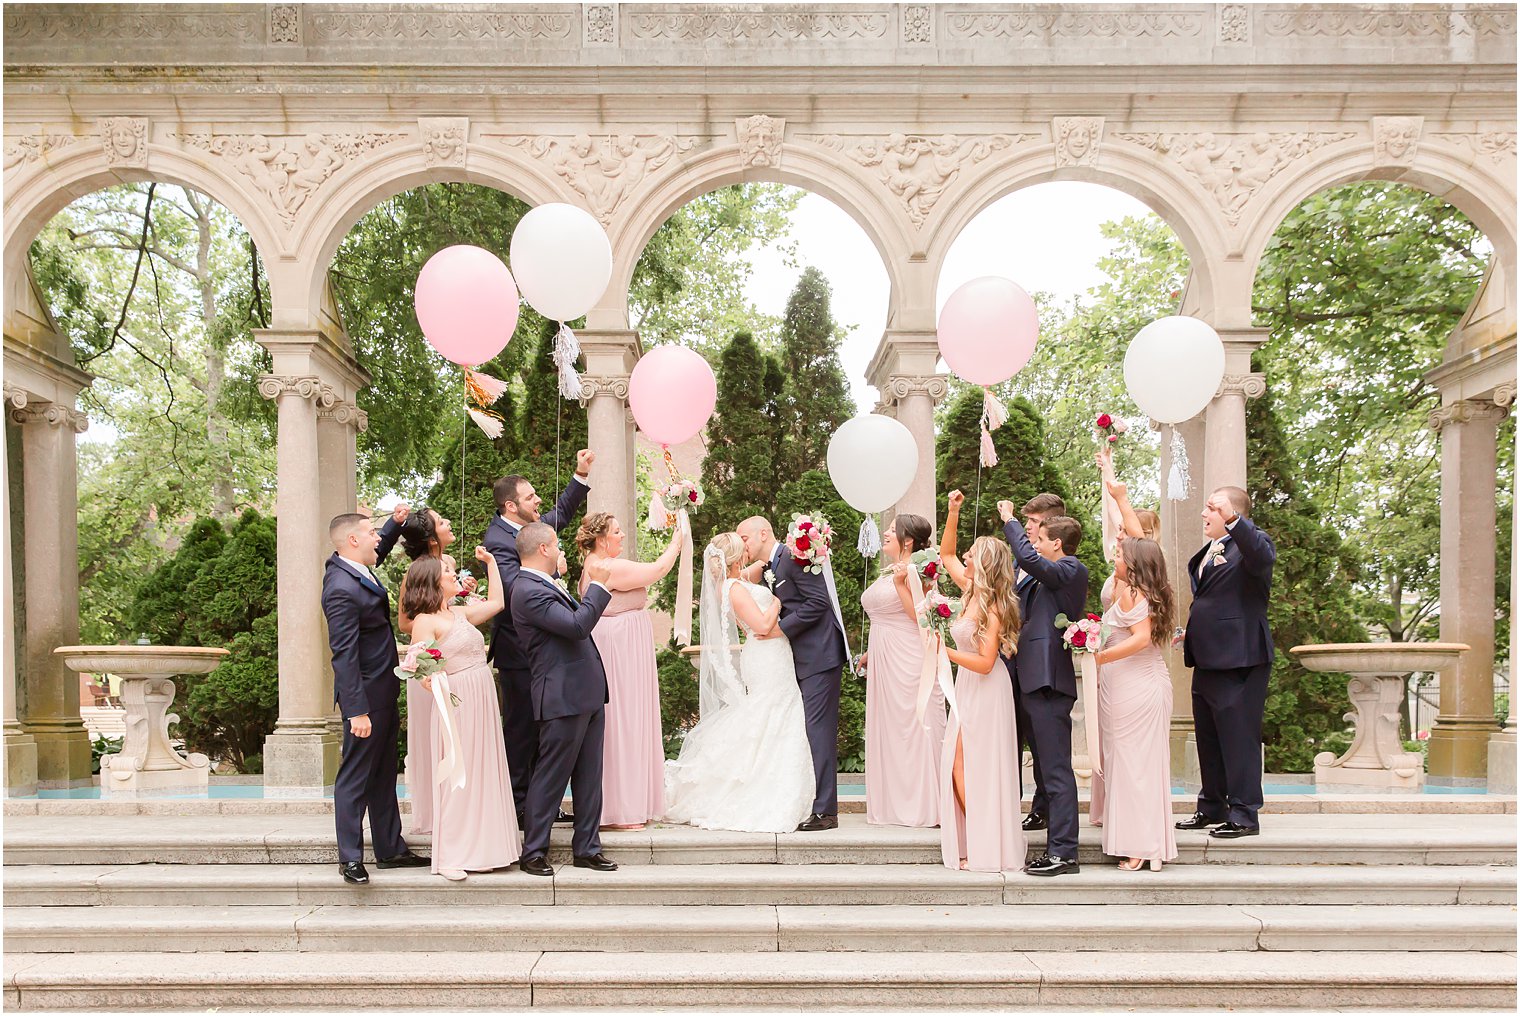 Bridal party with balloons